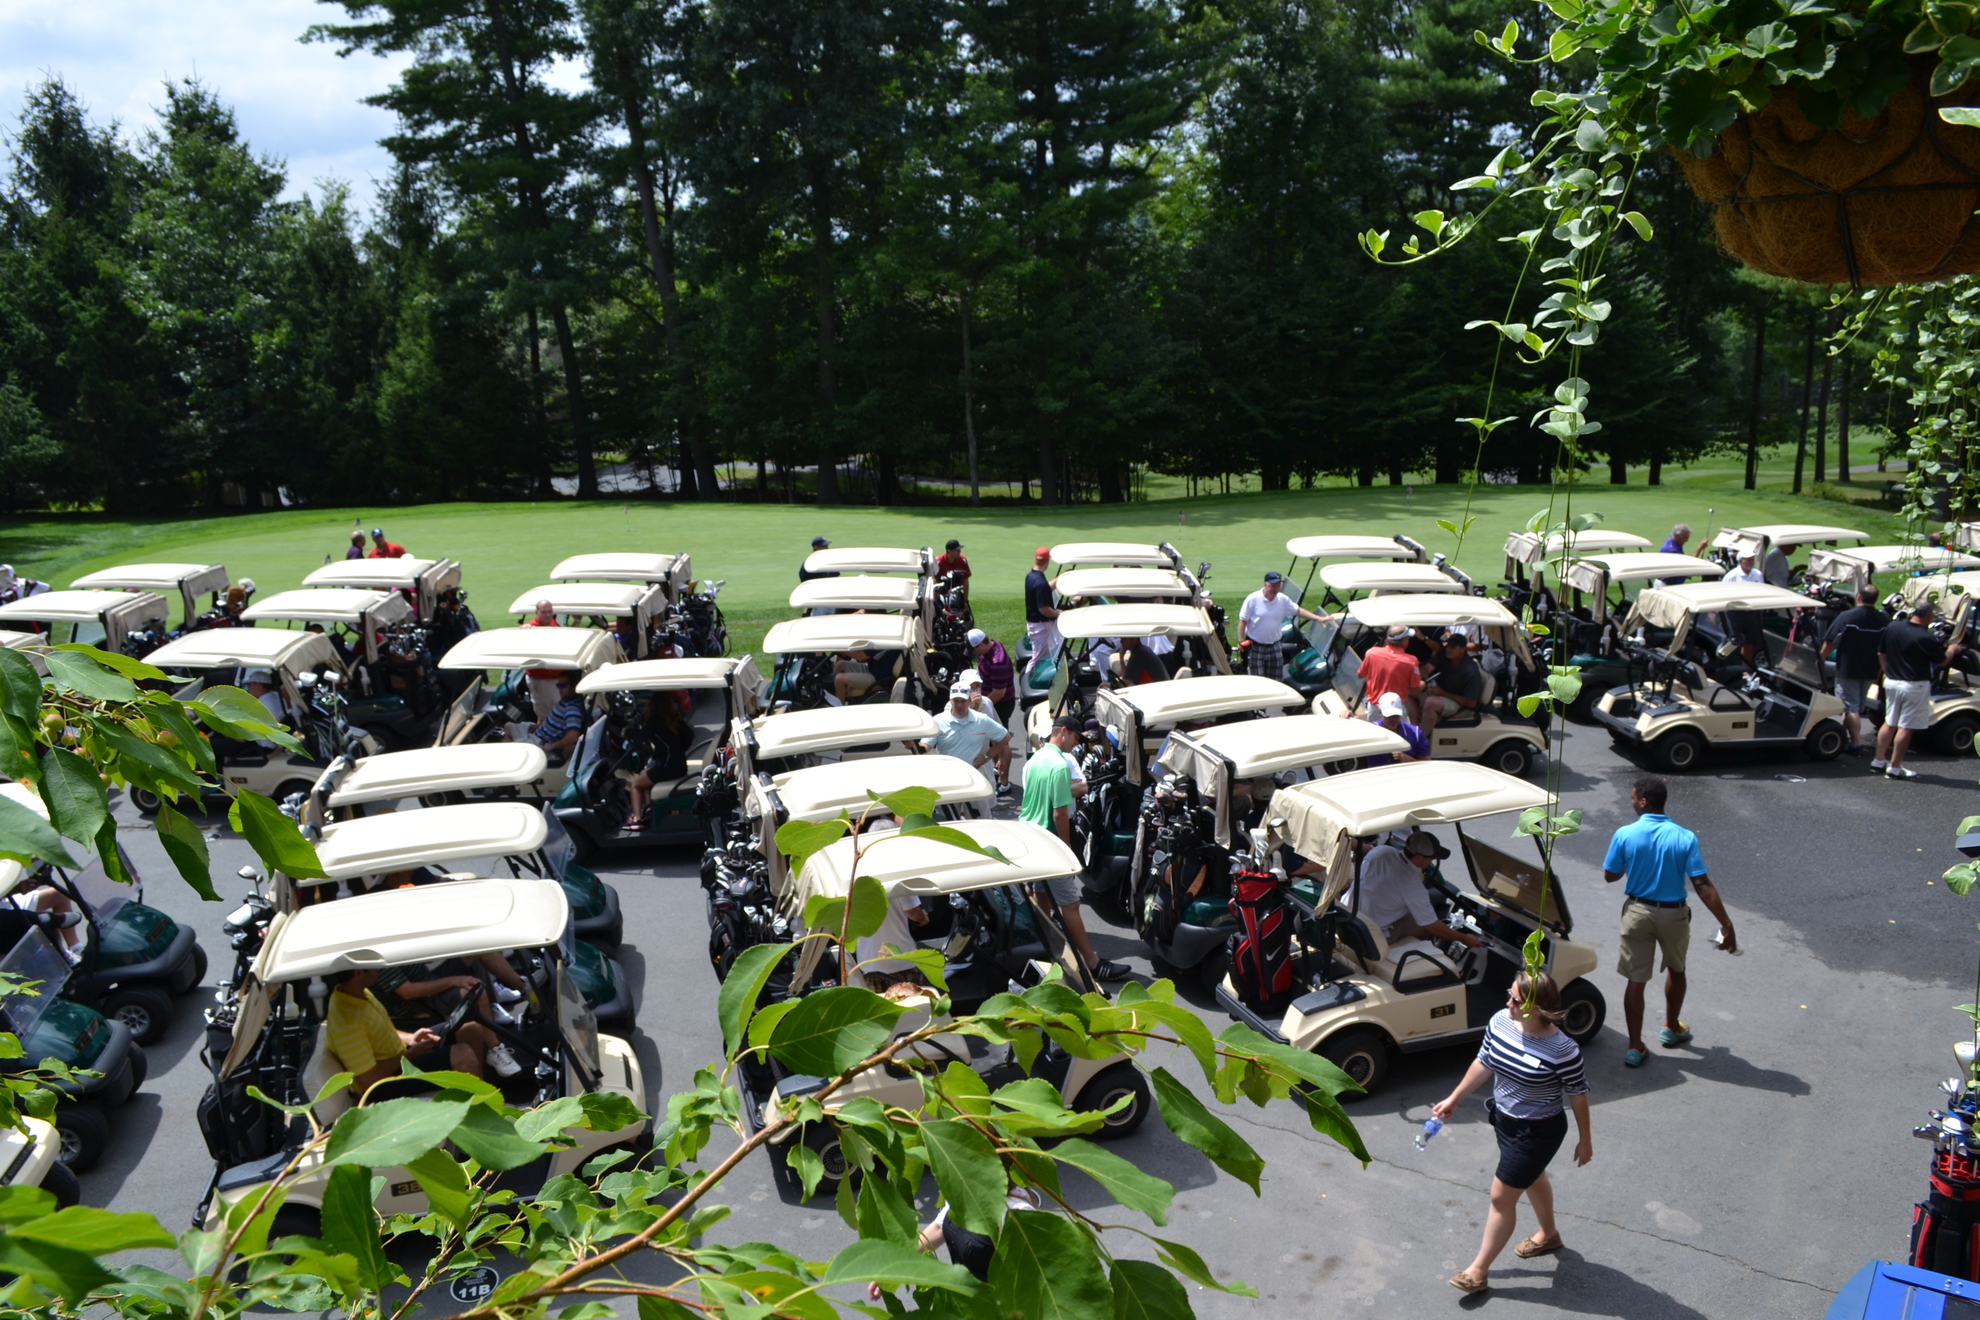 Collection of golfers and golf carts.